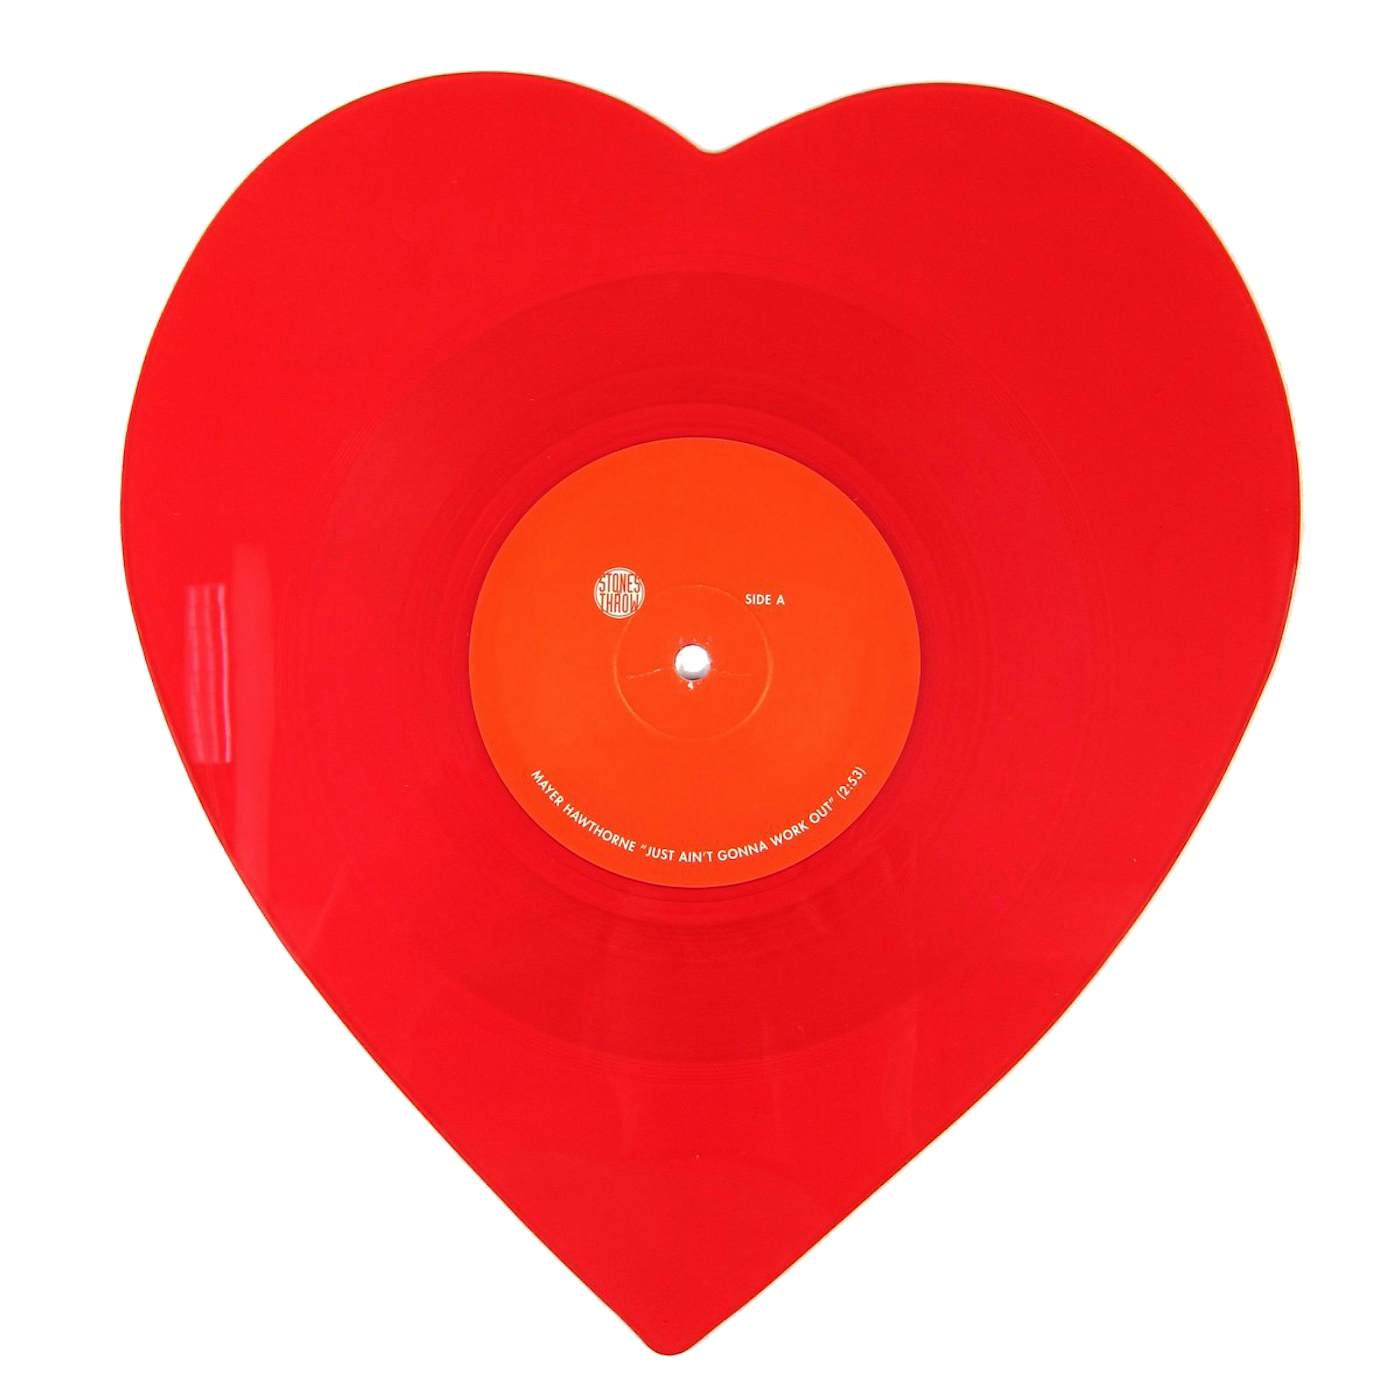 Mayer Hawthorne Just Ain't Gonna Work Out 10" Heart Shaped Vinyl